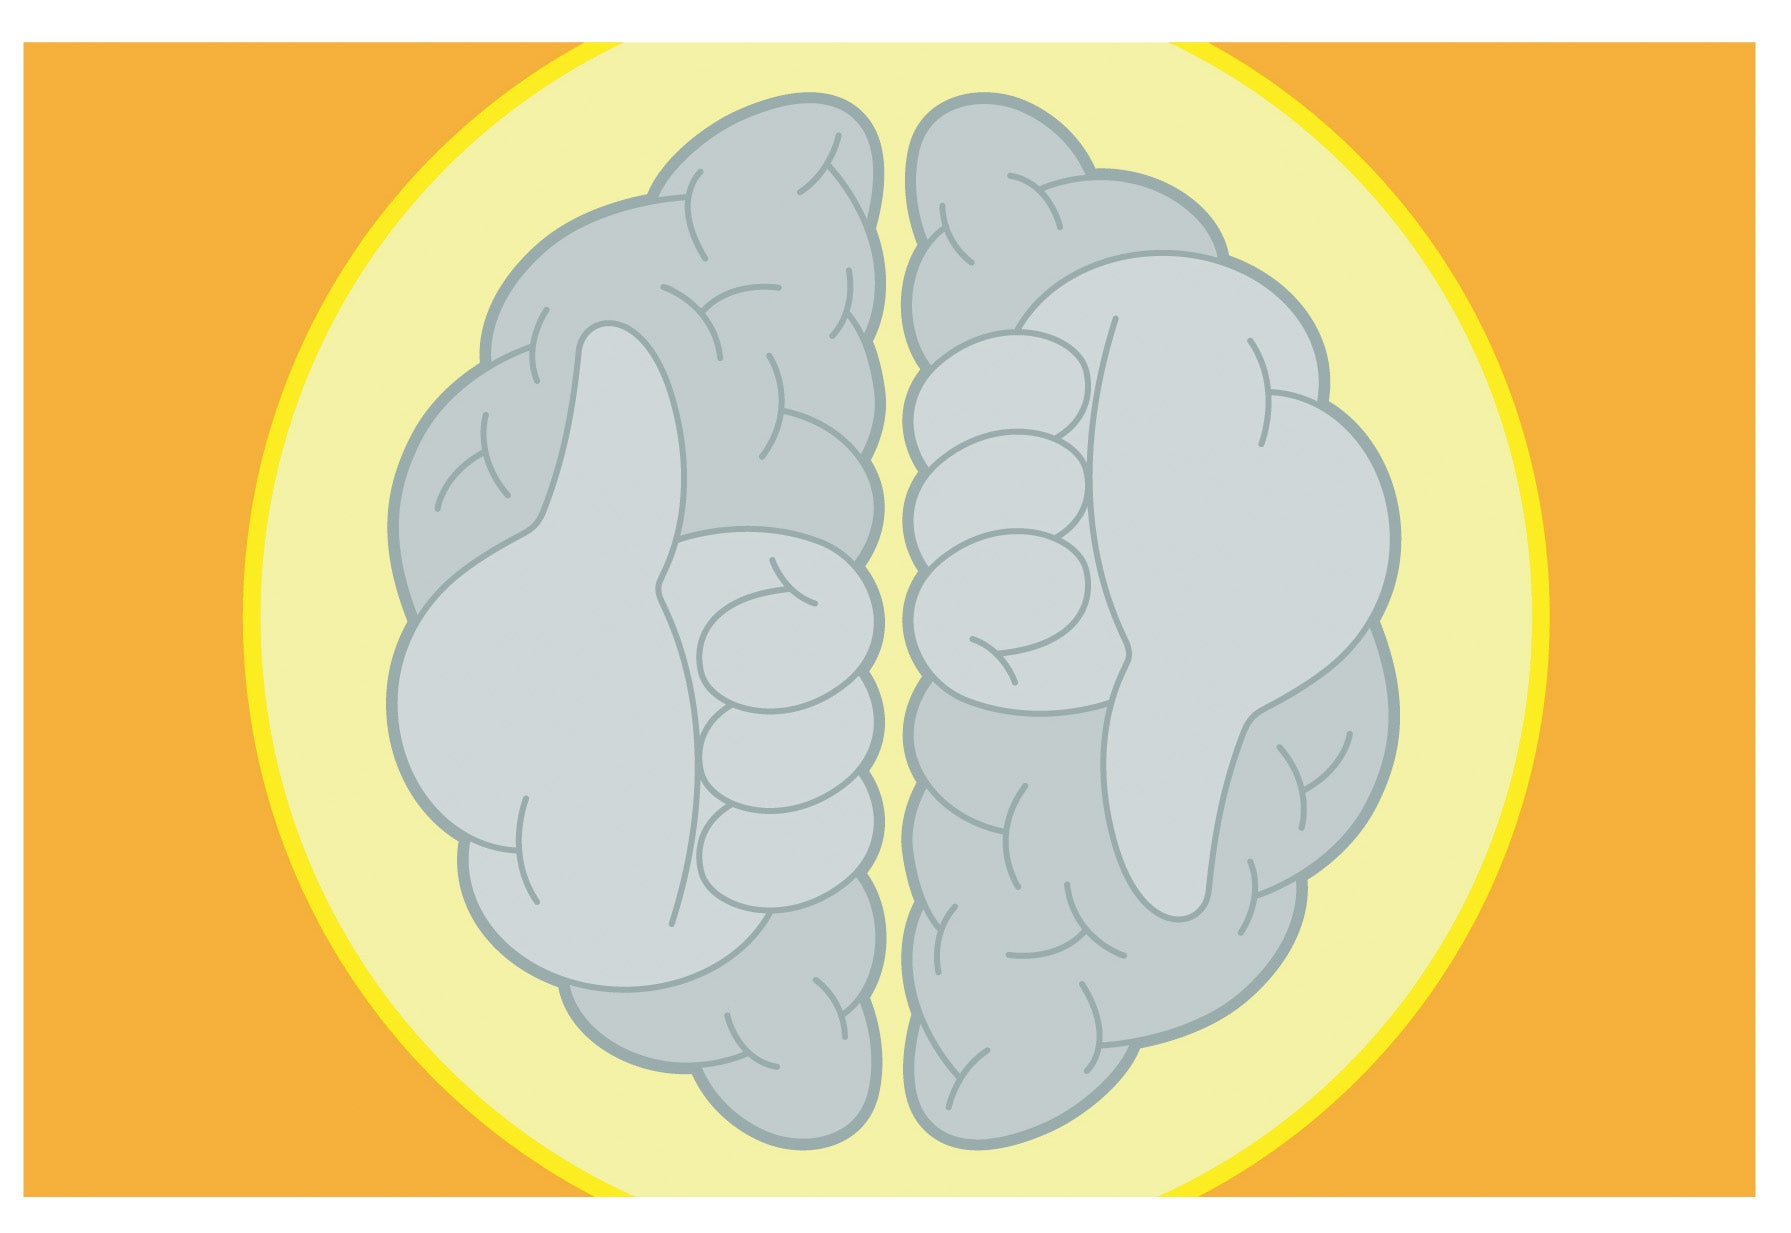 Illustration of two parts of a brain, with a thumbs up on one side and a thumbs down on the other side